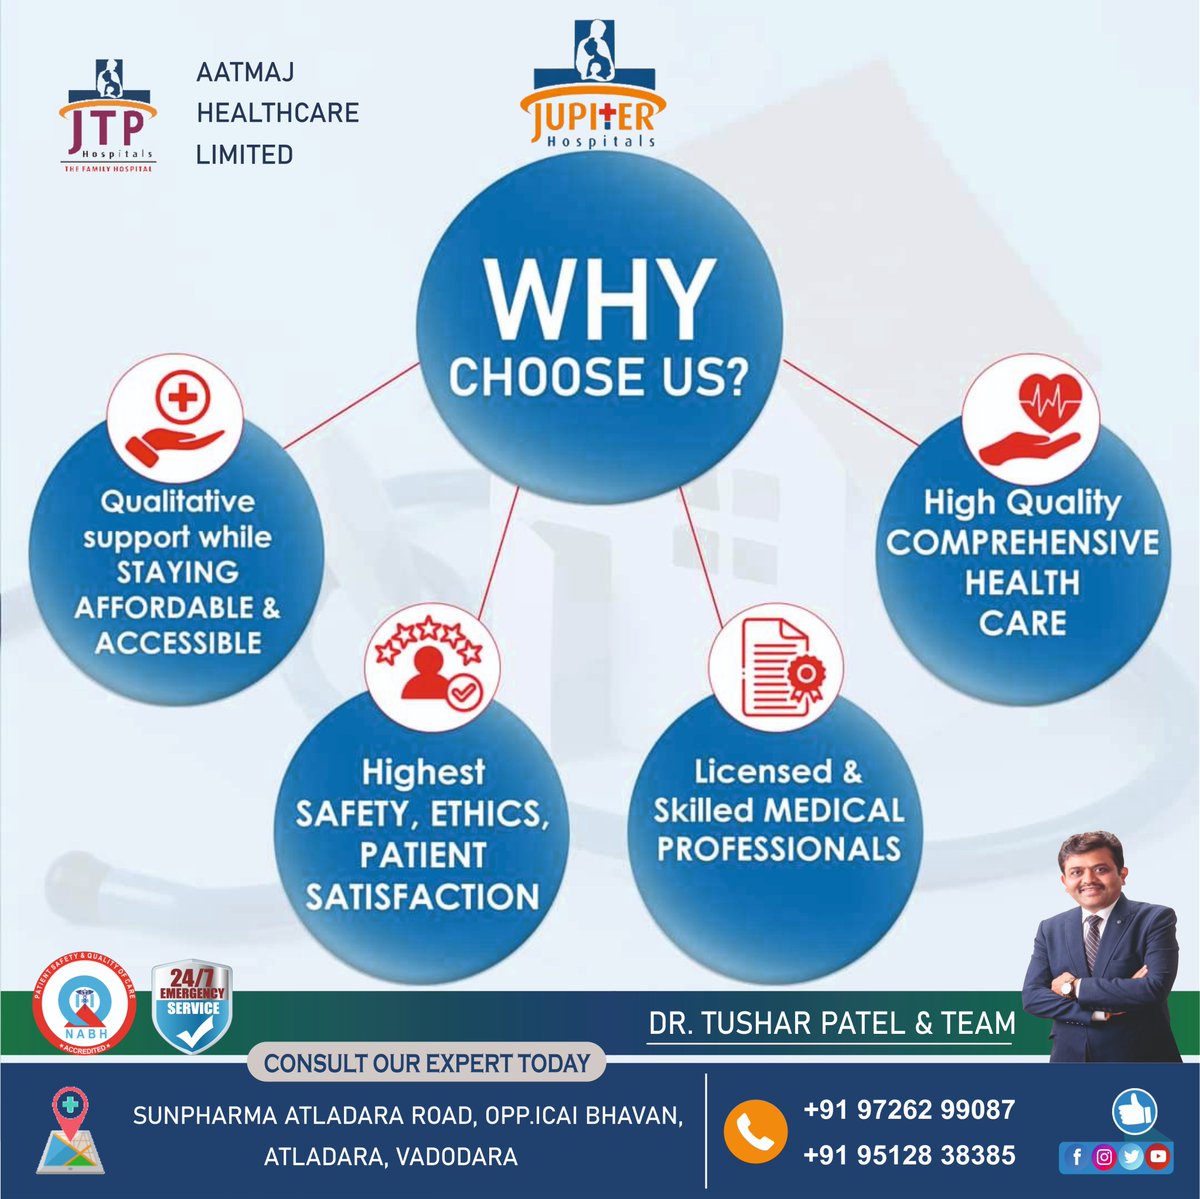 Why choose us?
Jupiter Hospitals is a venture by jupiter group. Our motto is to serve all class of people with worldclass care at affordable rates.
#jupiterhospitals #jupiterhospital #vadodara #baroda #healthcare #covidandpregnancy #multispecialty #worldclasscare #gooddoctor